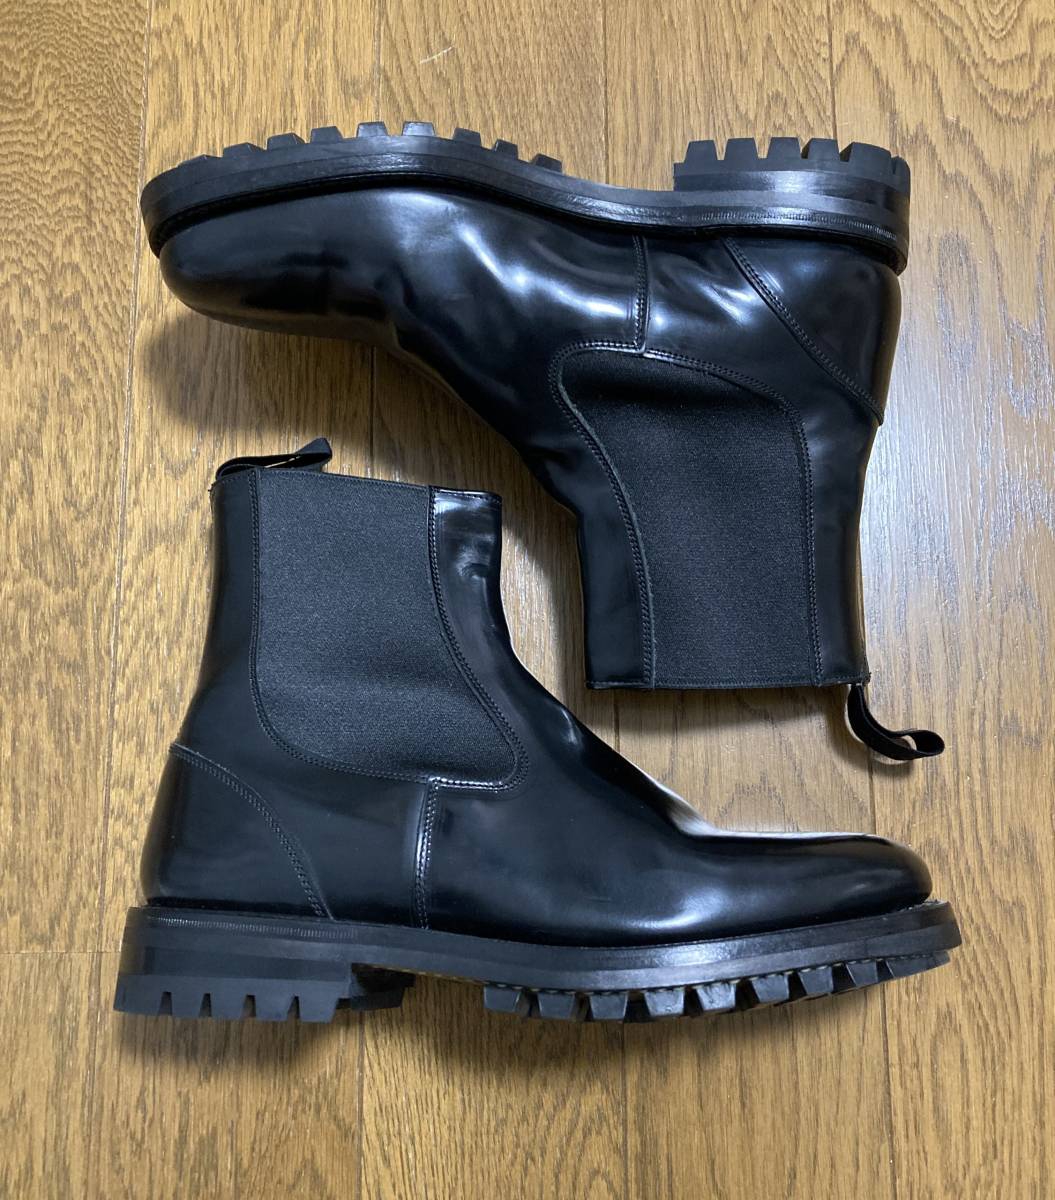  beautiful goods *[Sulvam×Tricker\'s] 19AW regular price 107,800 BOOKBINDER glass leather side-gore boots 7 black cow leather M8001 monkey bam Tricker's 